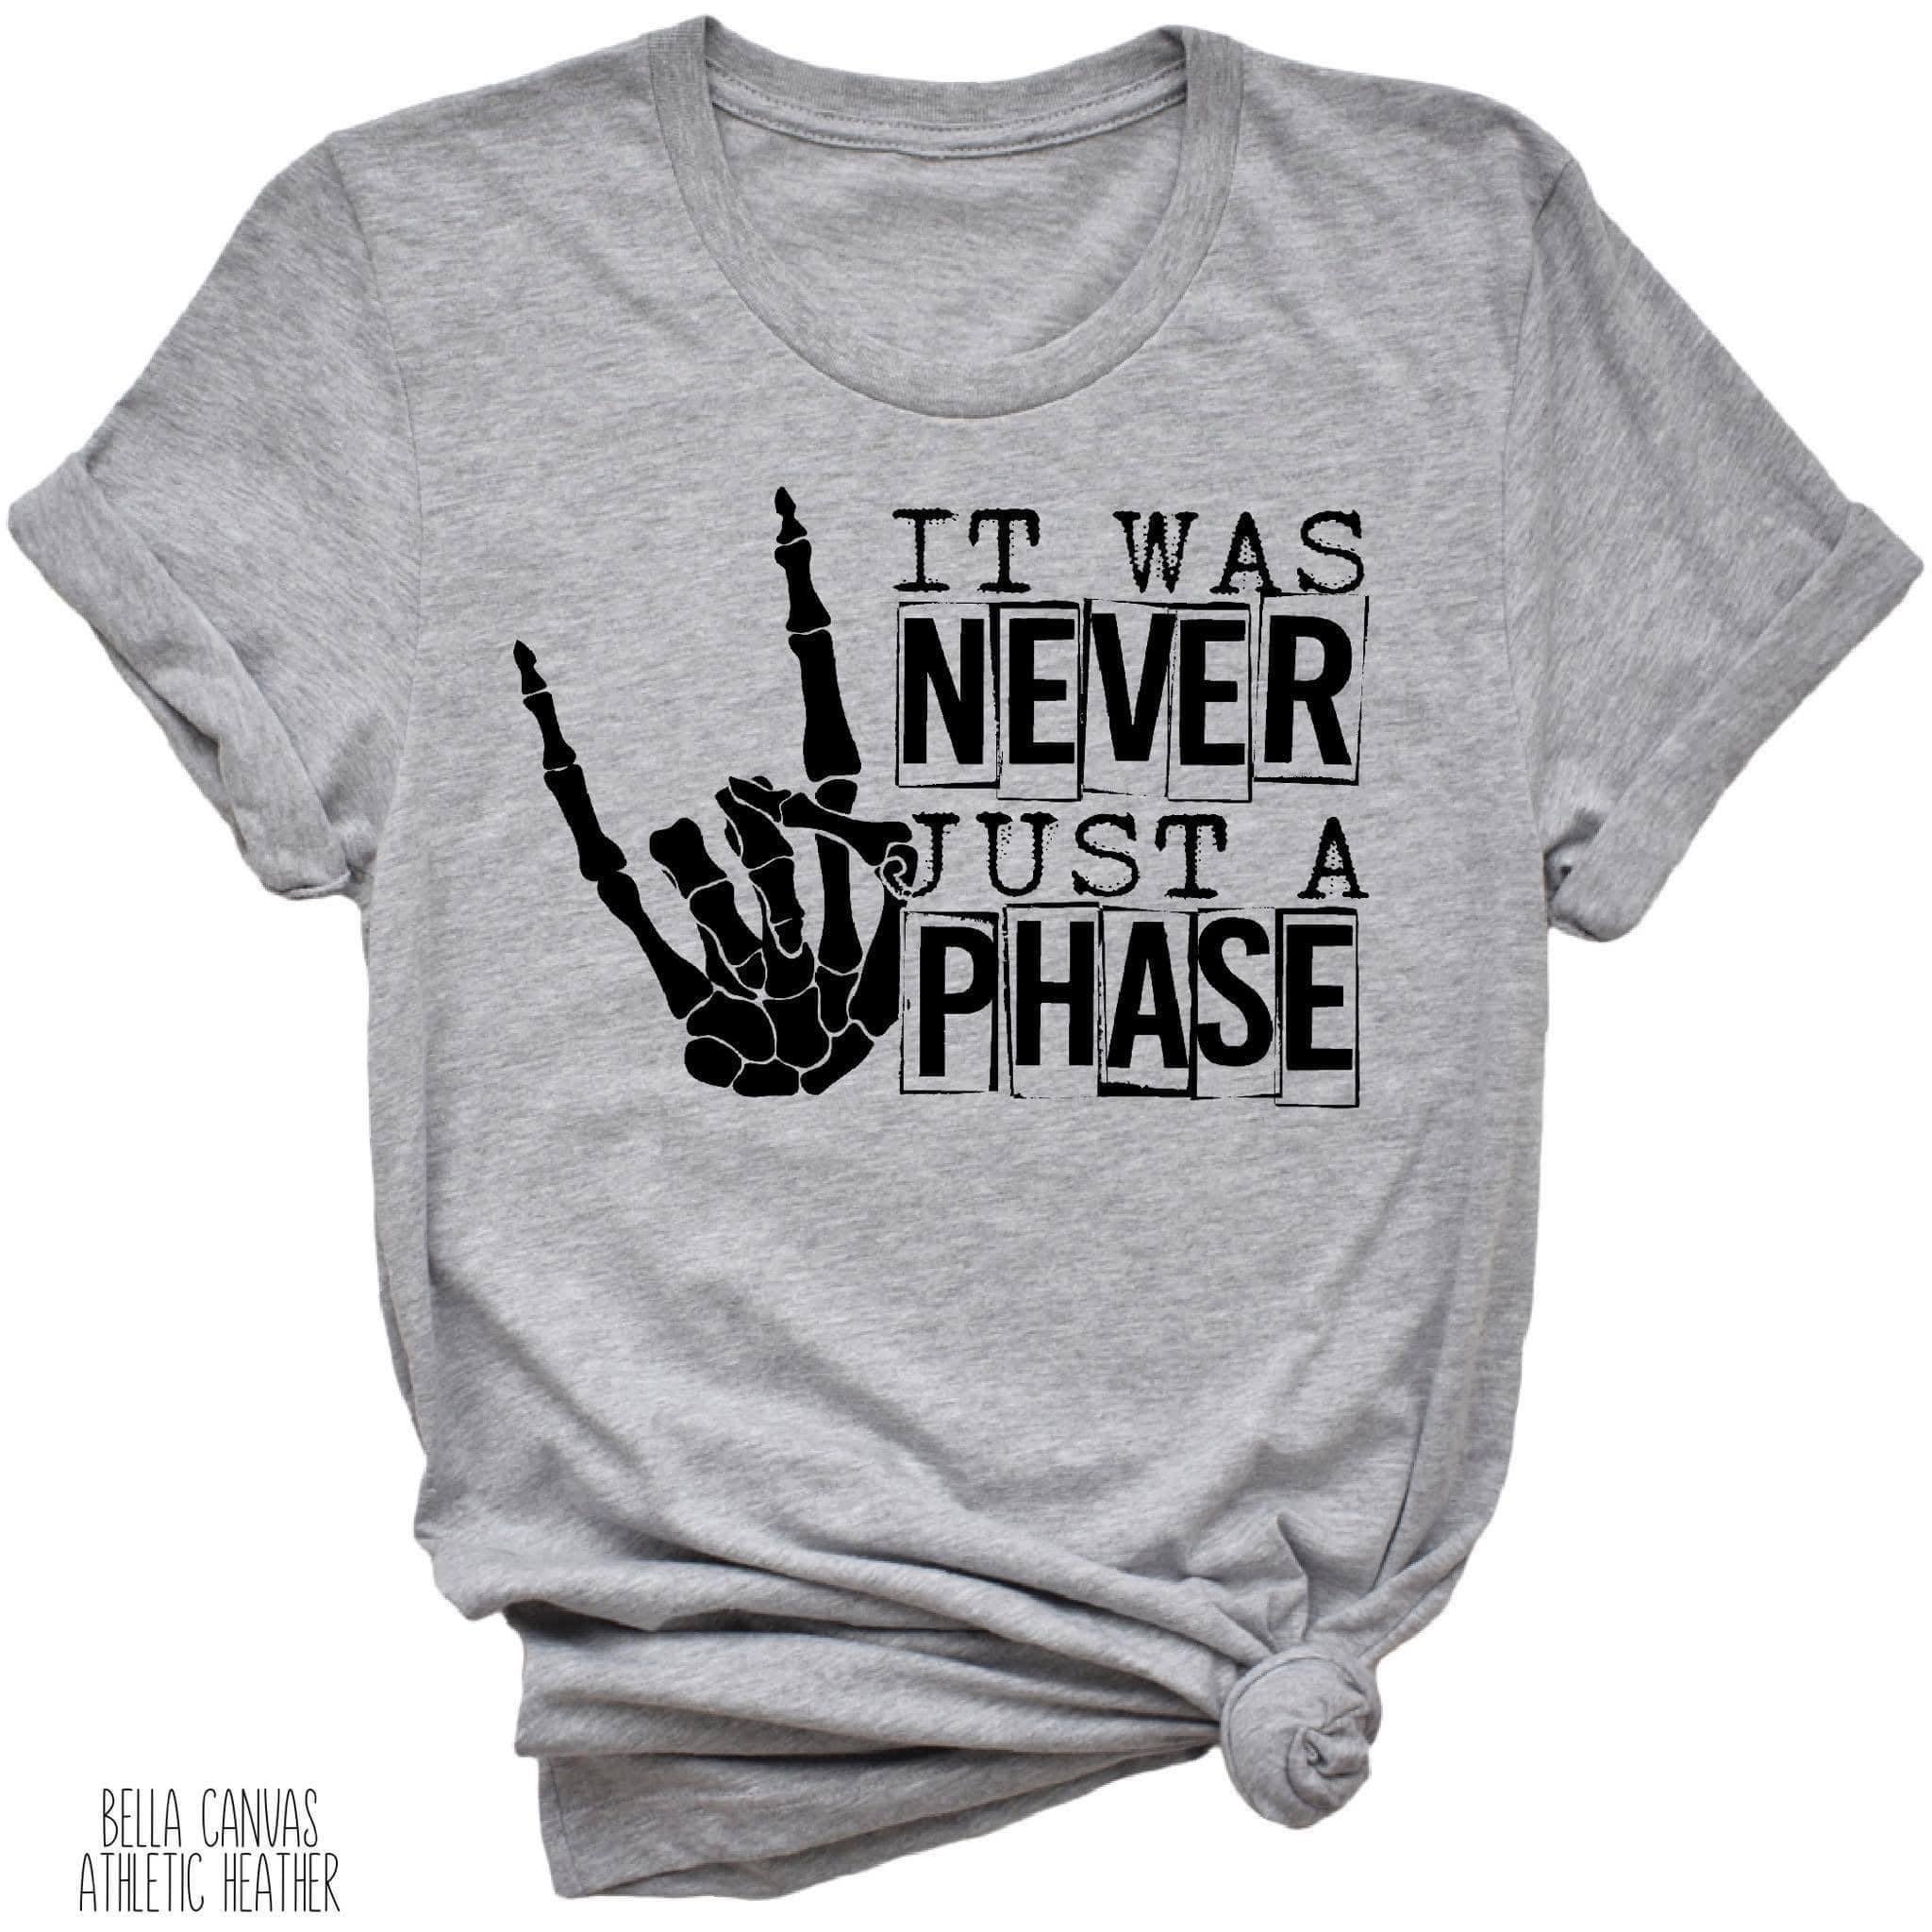 It Was Never Just A Phase - Tee